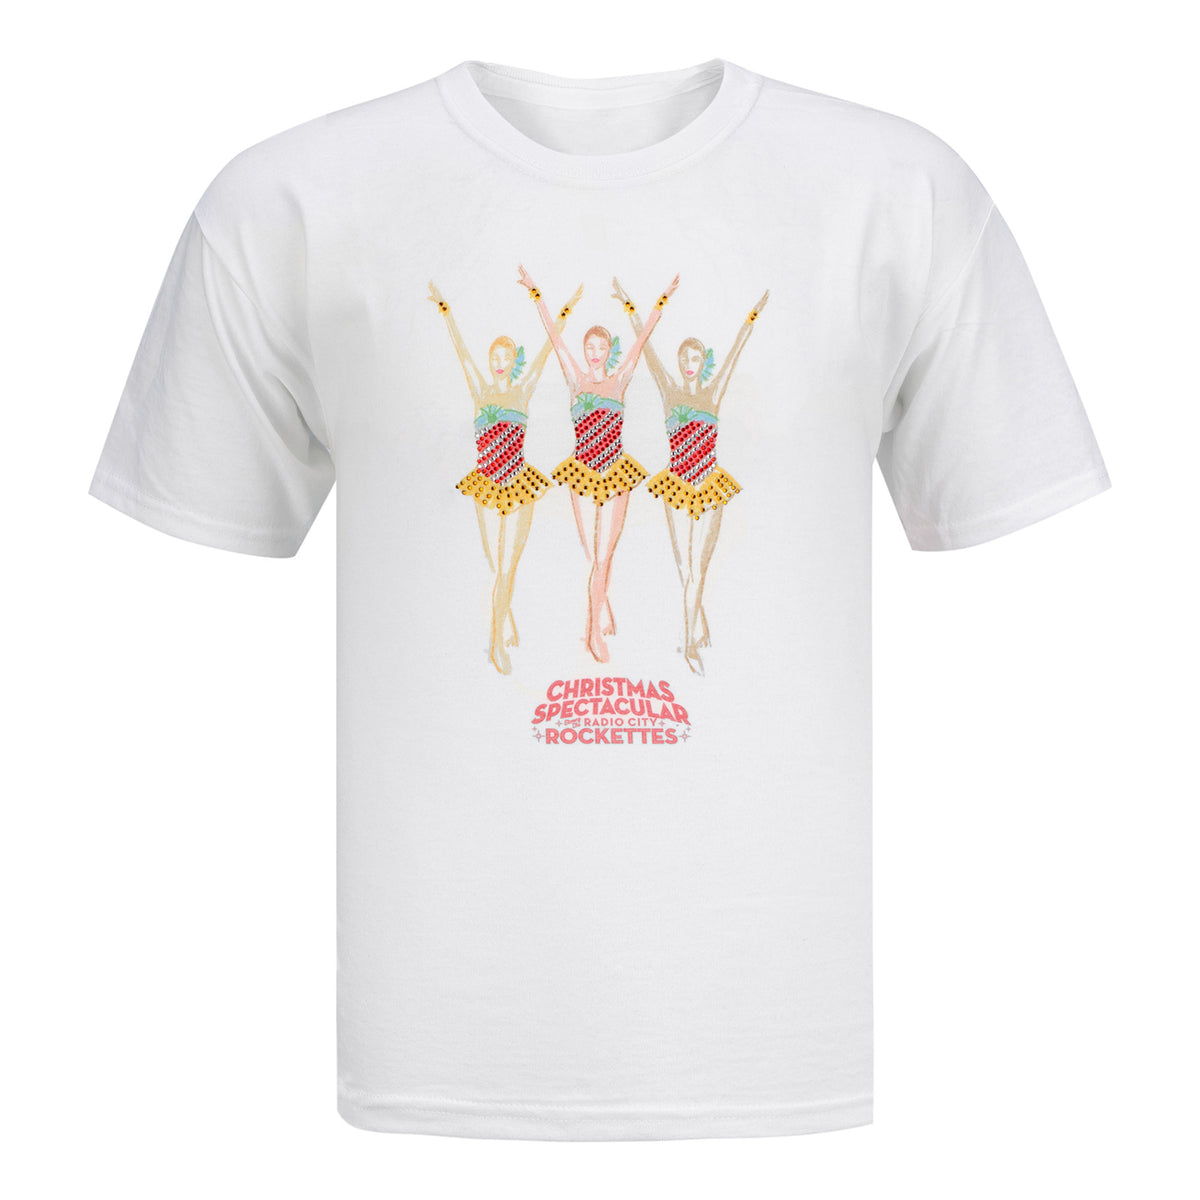 Rockettes Sparkly T-Shirt In White - Front View